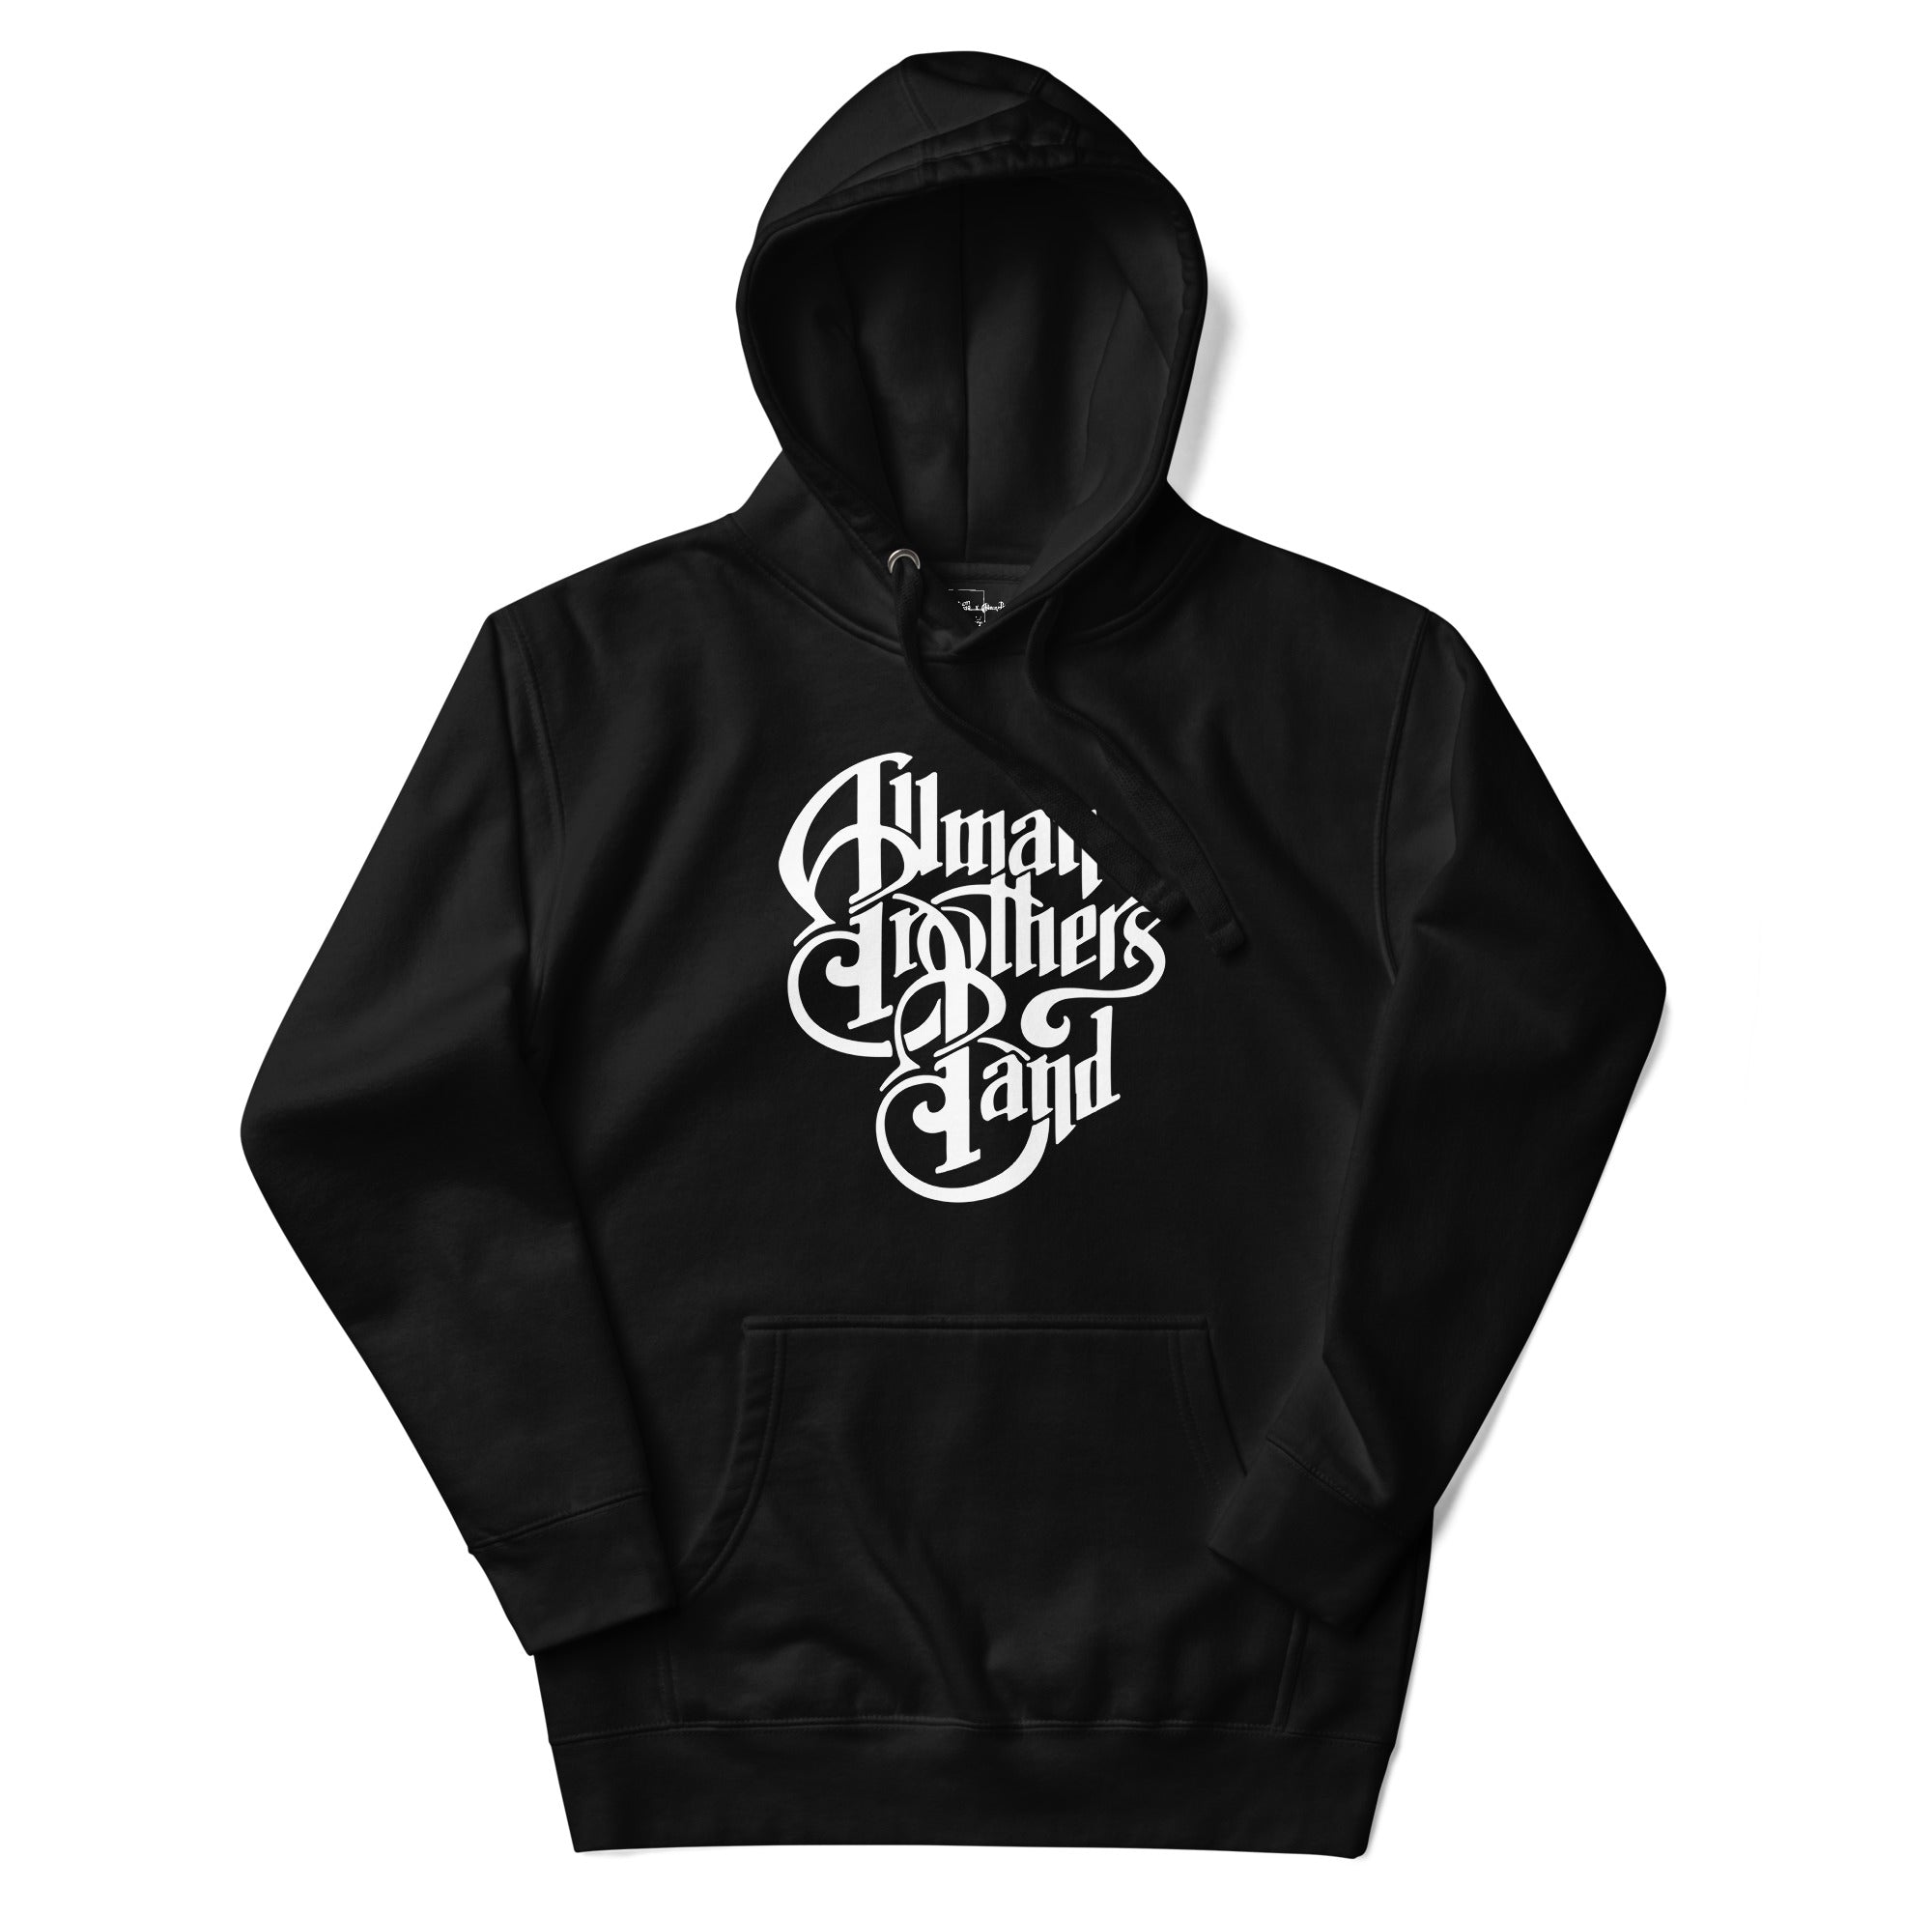 The Allman Brothers Band Classic Black & White Hoodie - Section 119